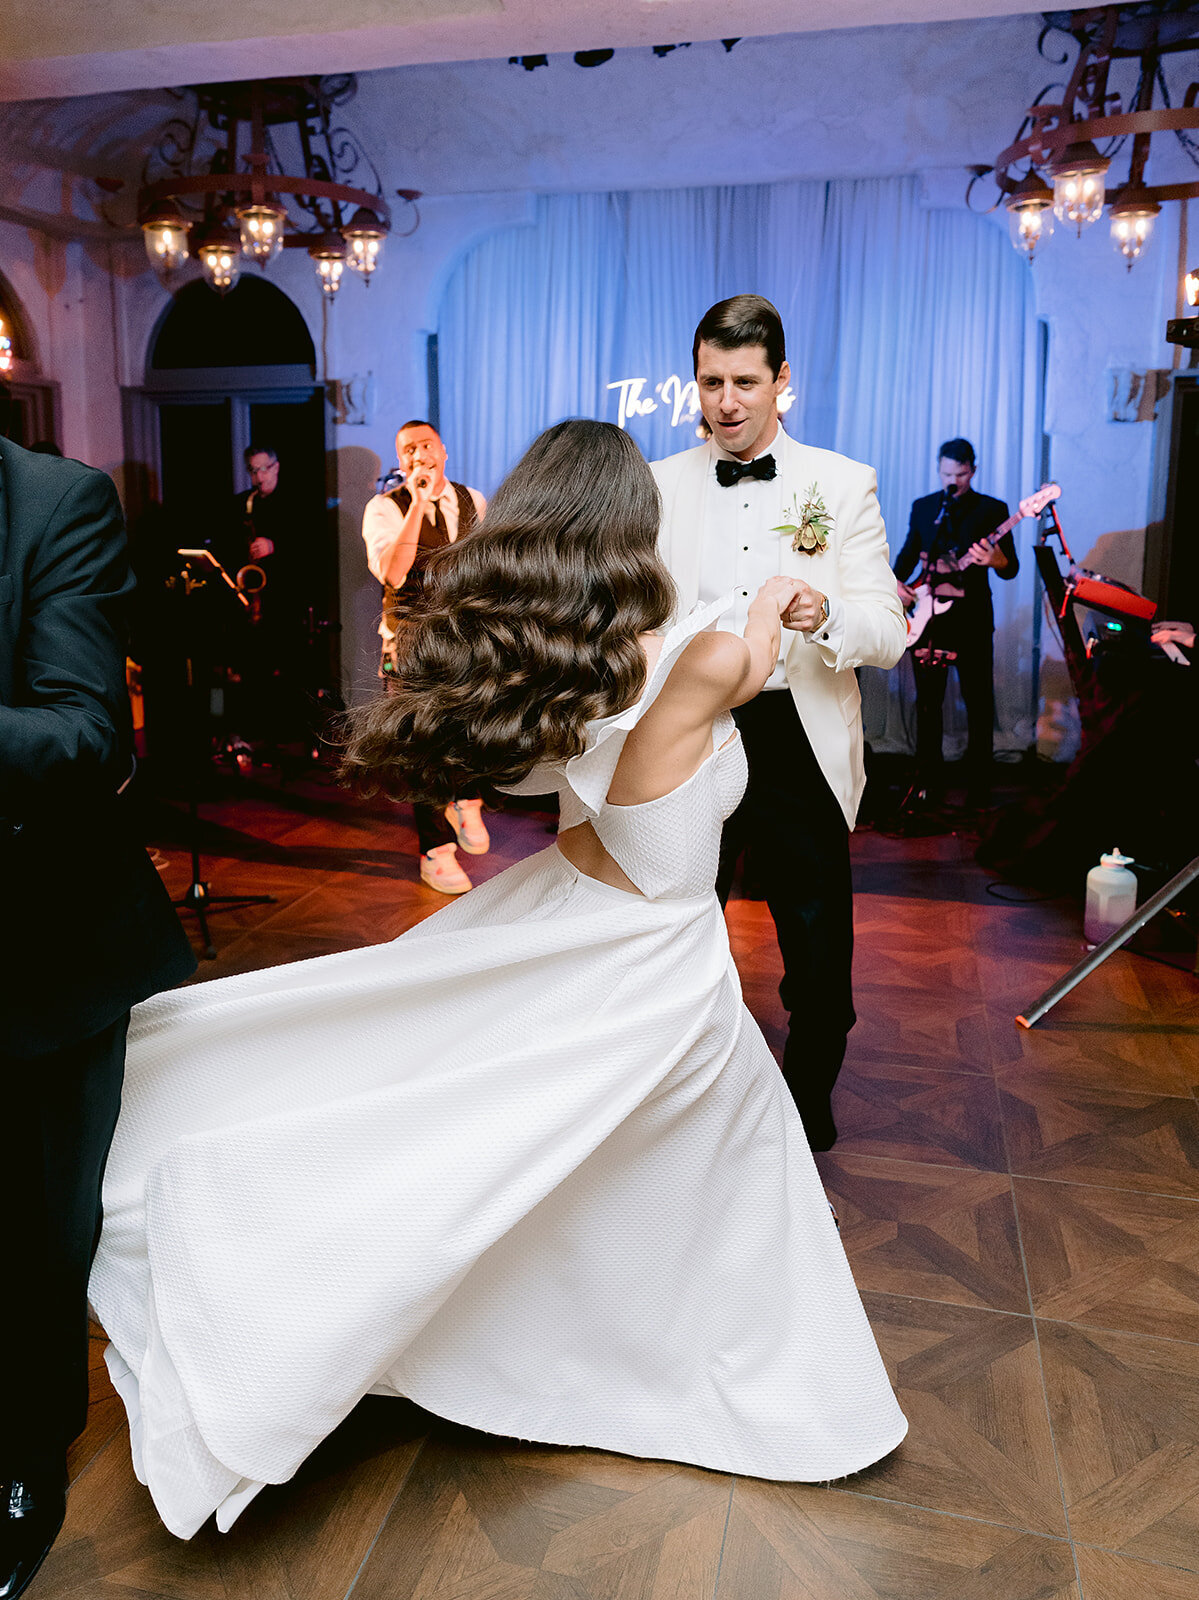 The bride and groom dance together in front of the hired band